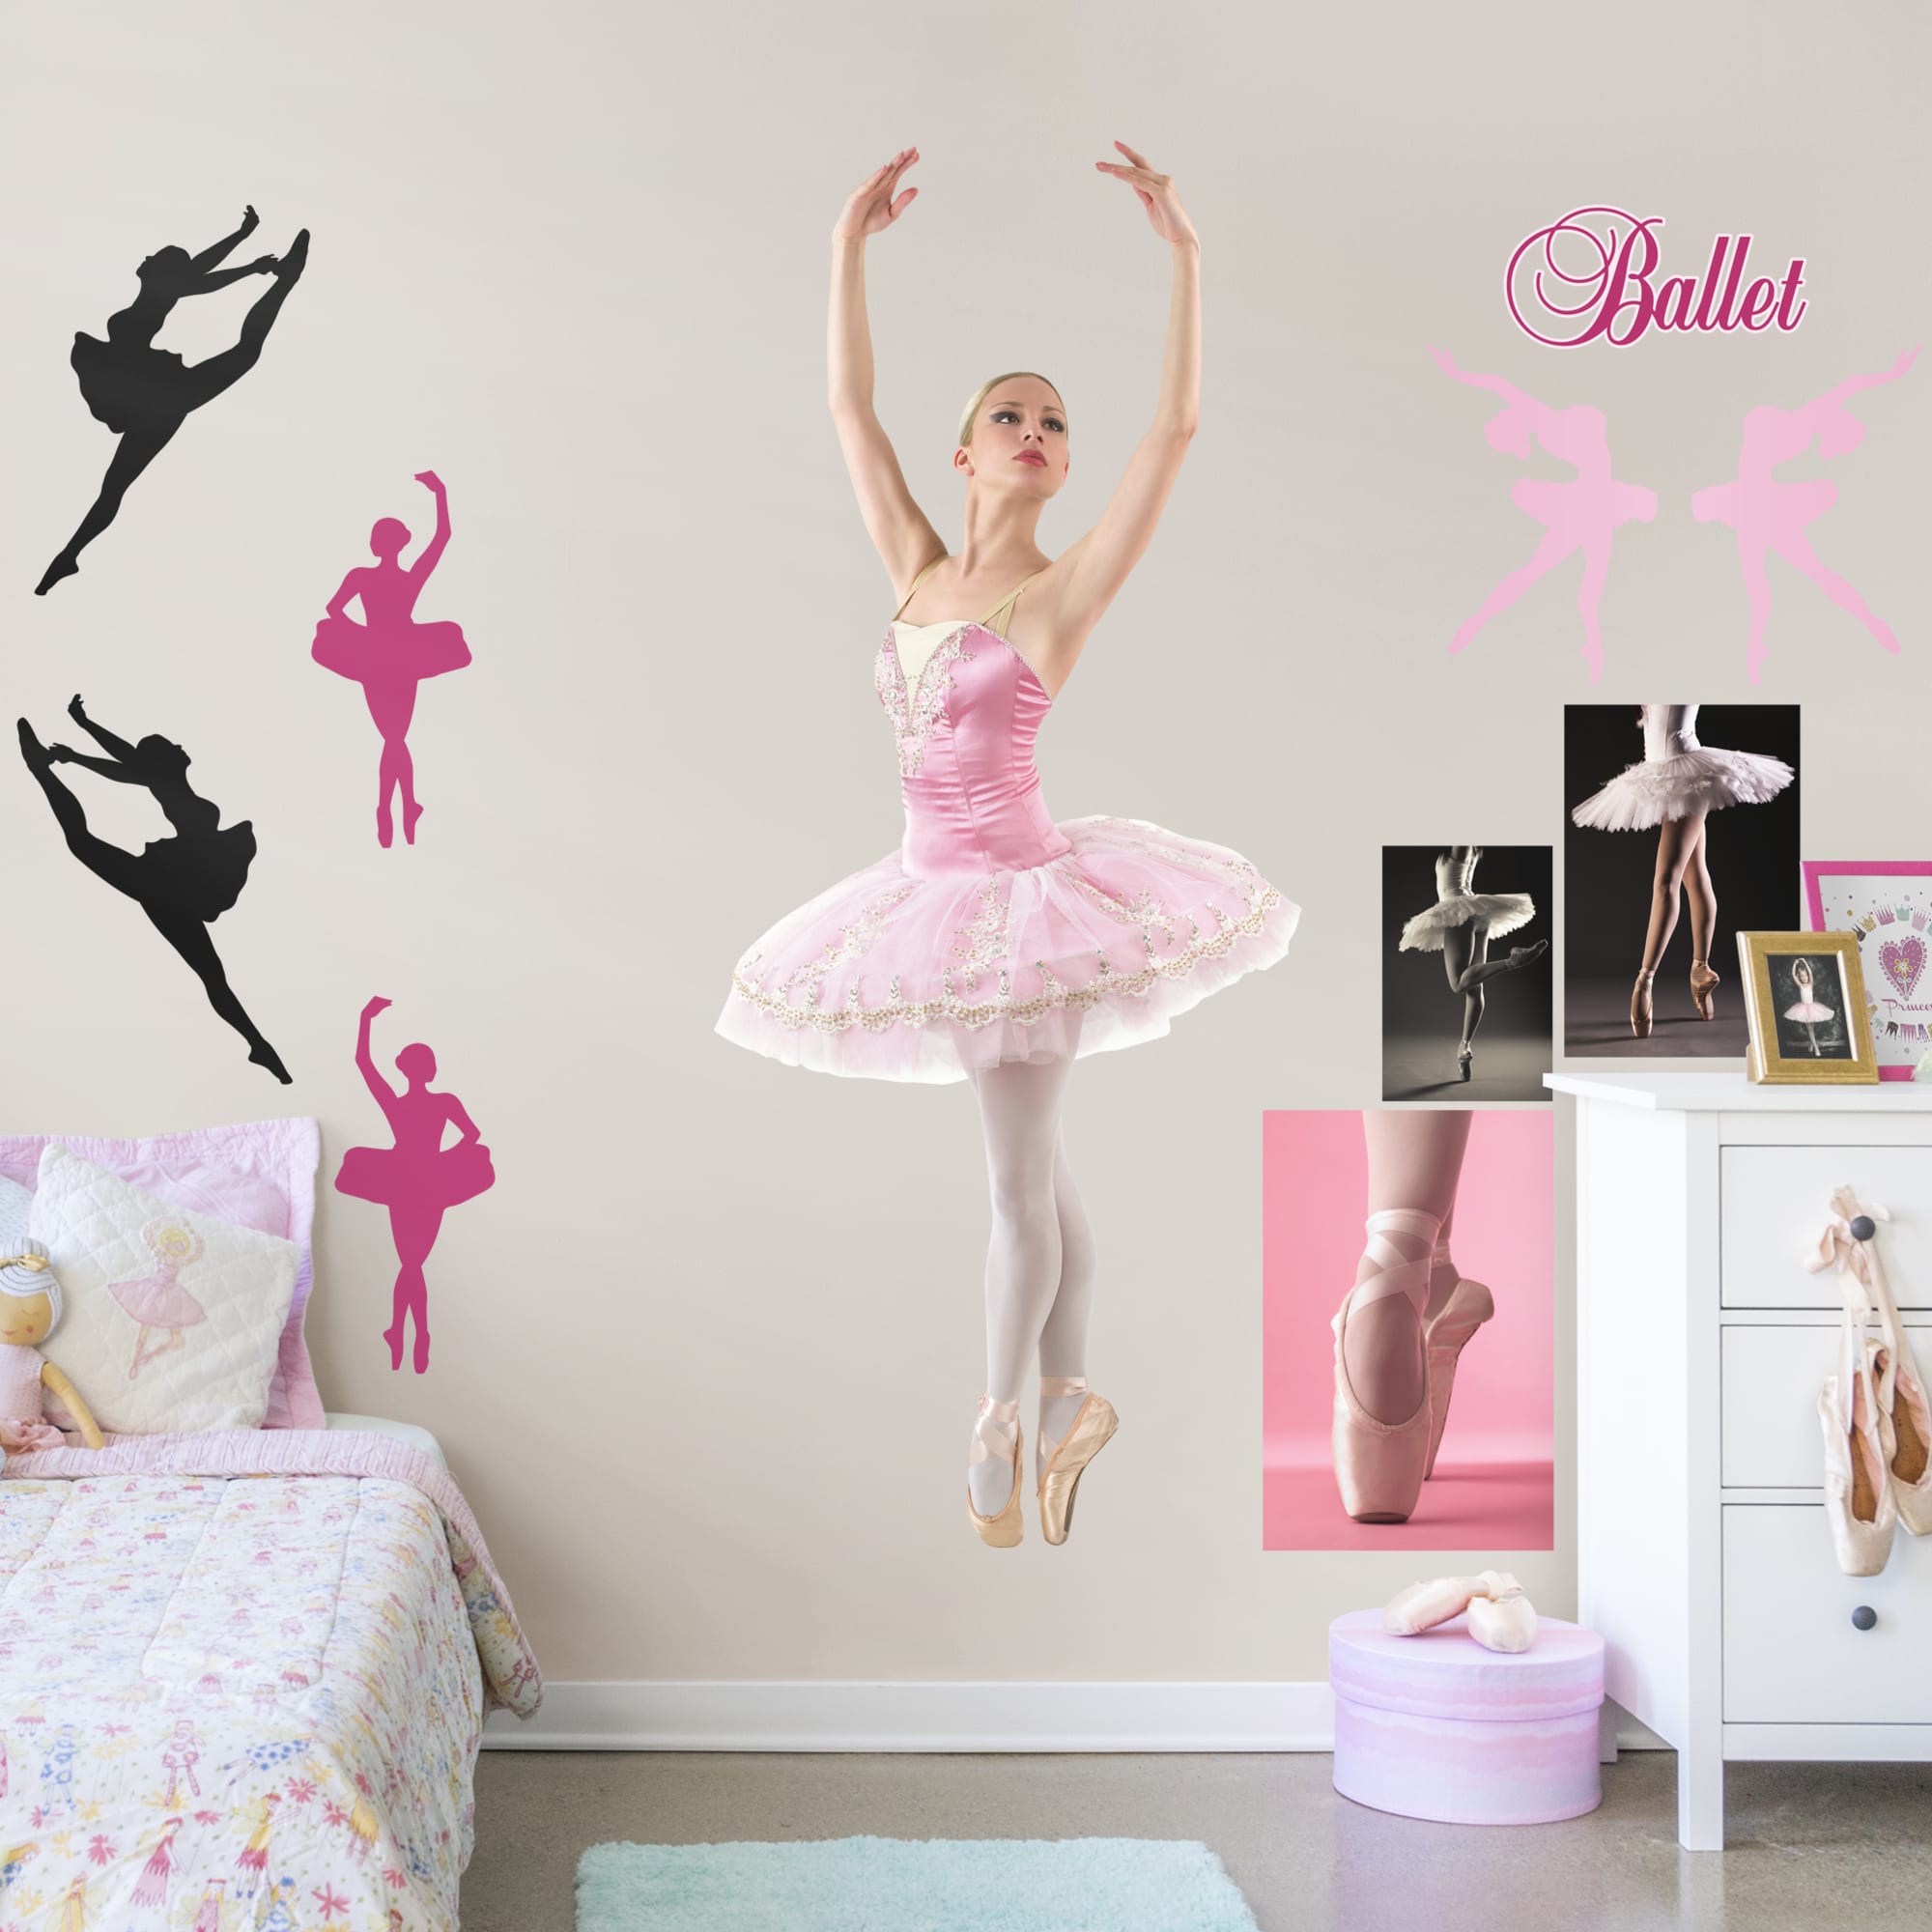 Ballet: Ballerina - Removable Vinyl Decal Life-Size Character + 12 Decals (33"W x 78"H) by Fathead